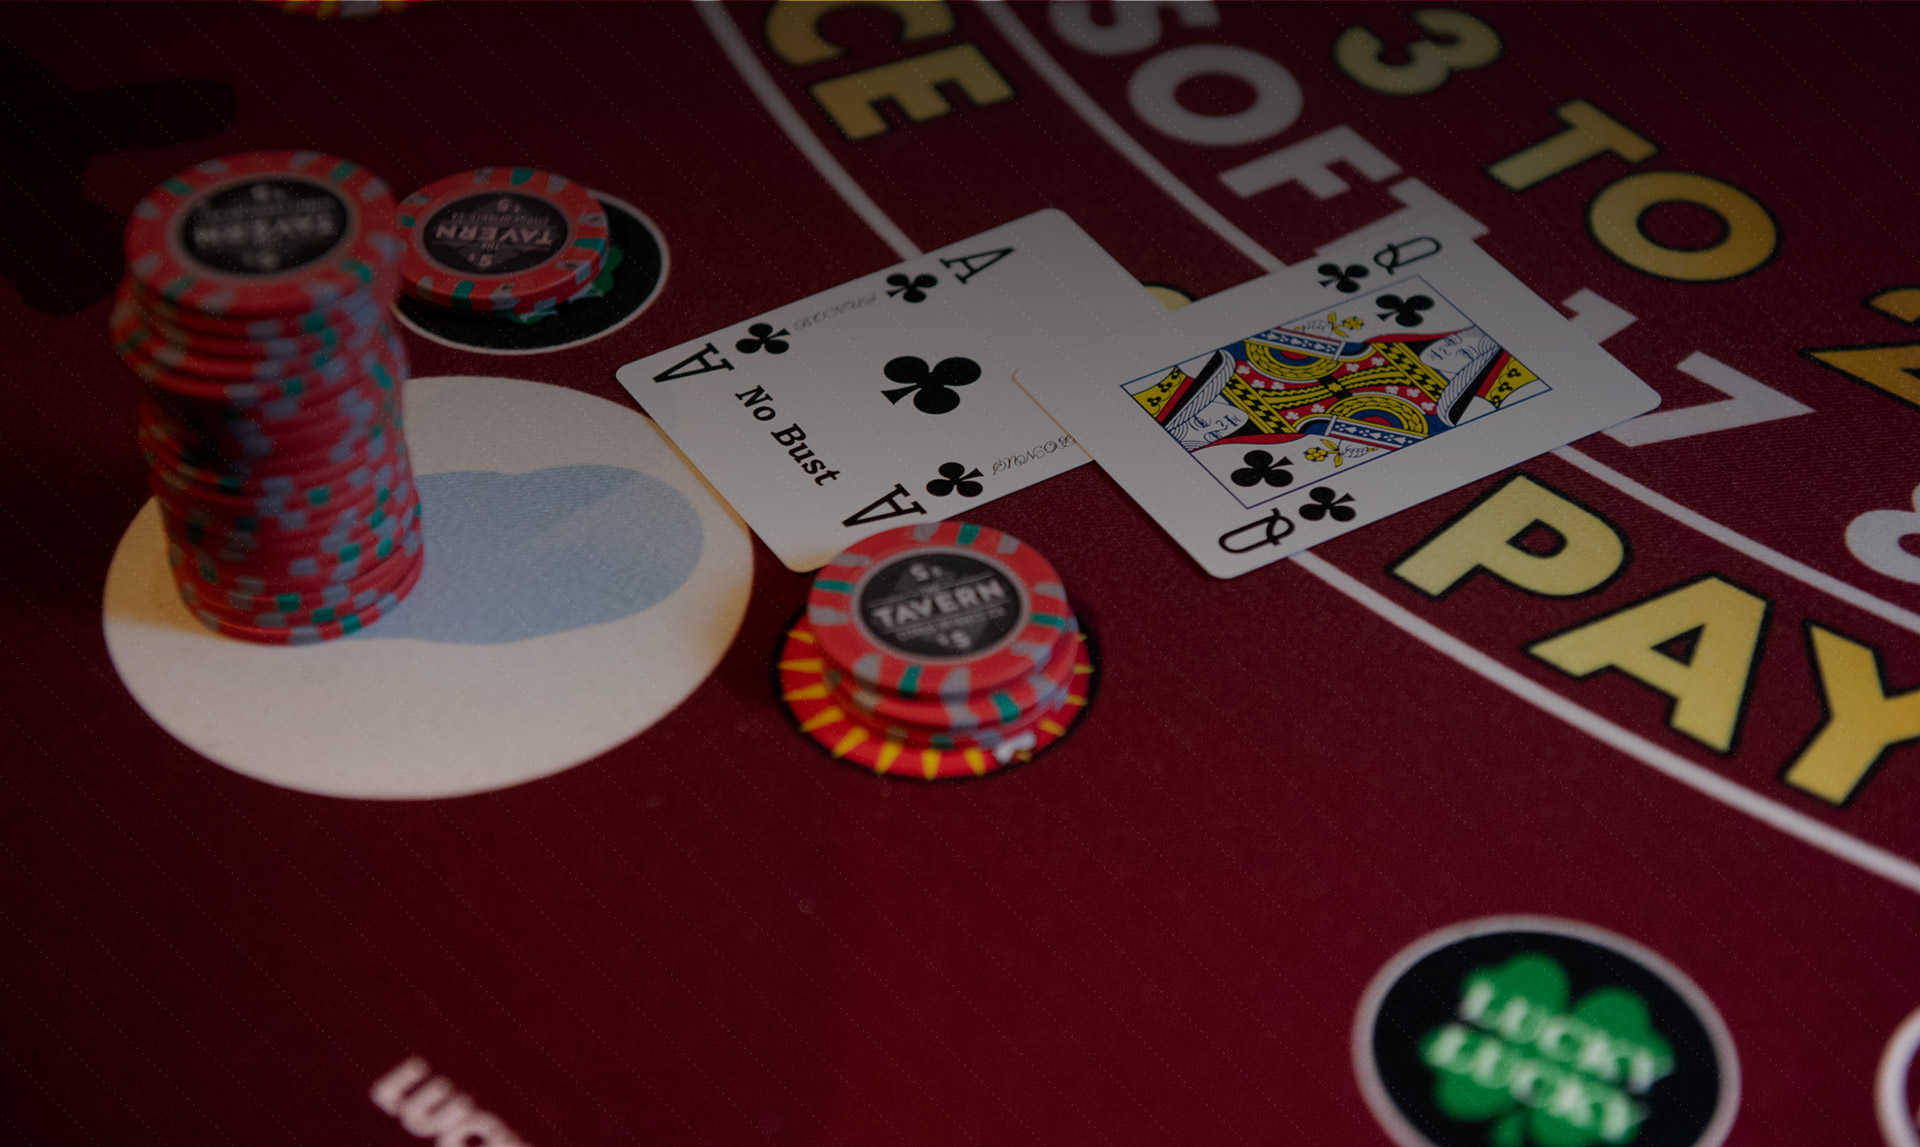 Poker table with red felt and chips and two cards turned to show a Ace and Queen of clubs